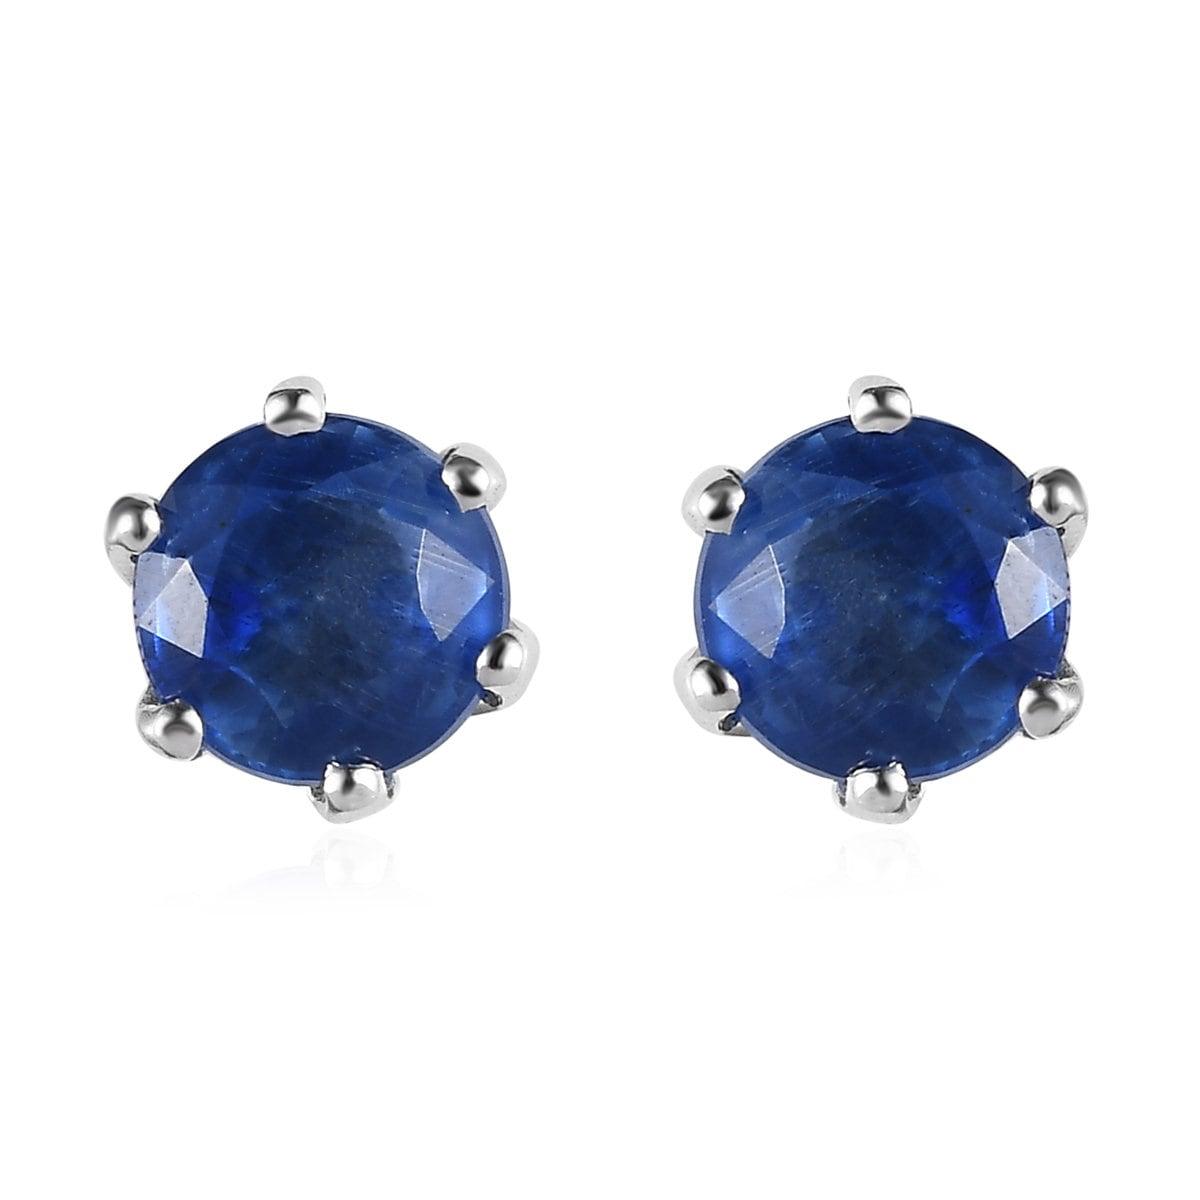 Kyanite Round Studs earrings, 925 Sterling Silver, 6 Prong Stud, Platinum Plated, Solitaire Round Studs by Inspiring Jewellery - Inspiring Jewellery